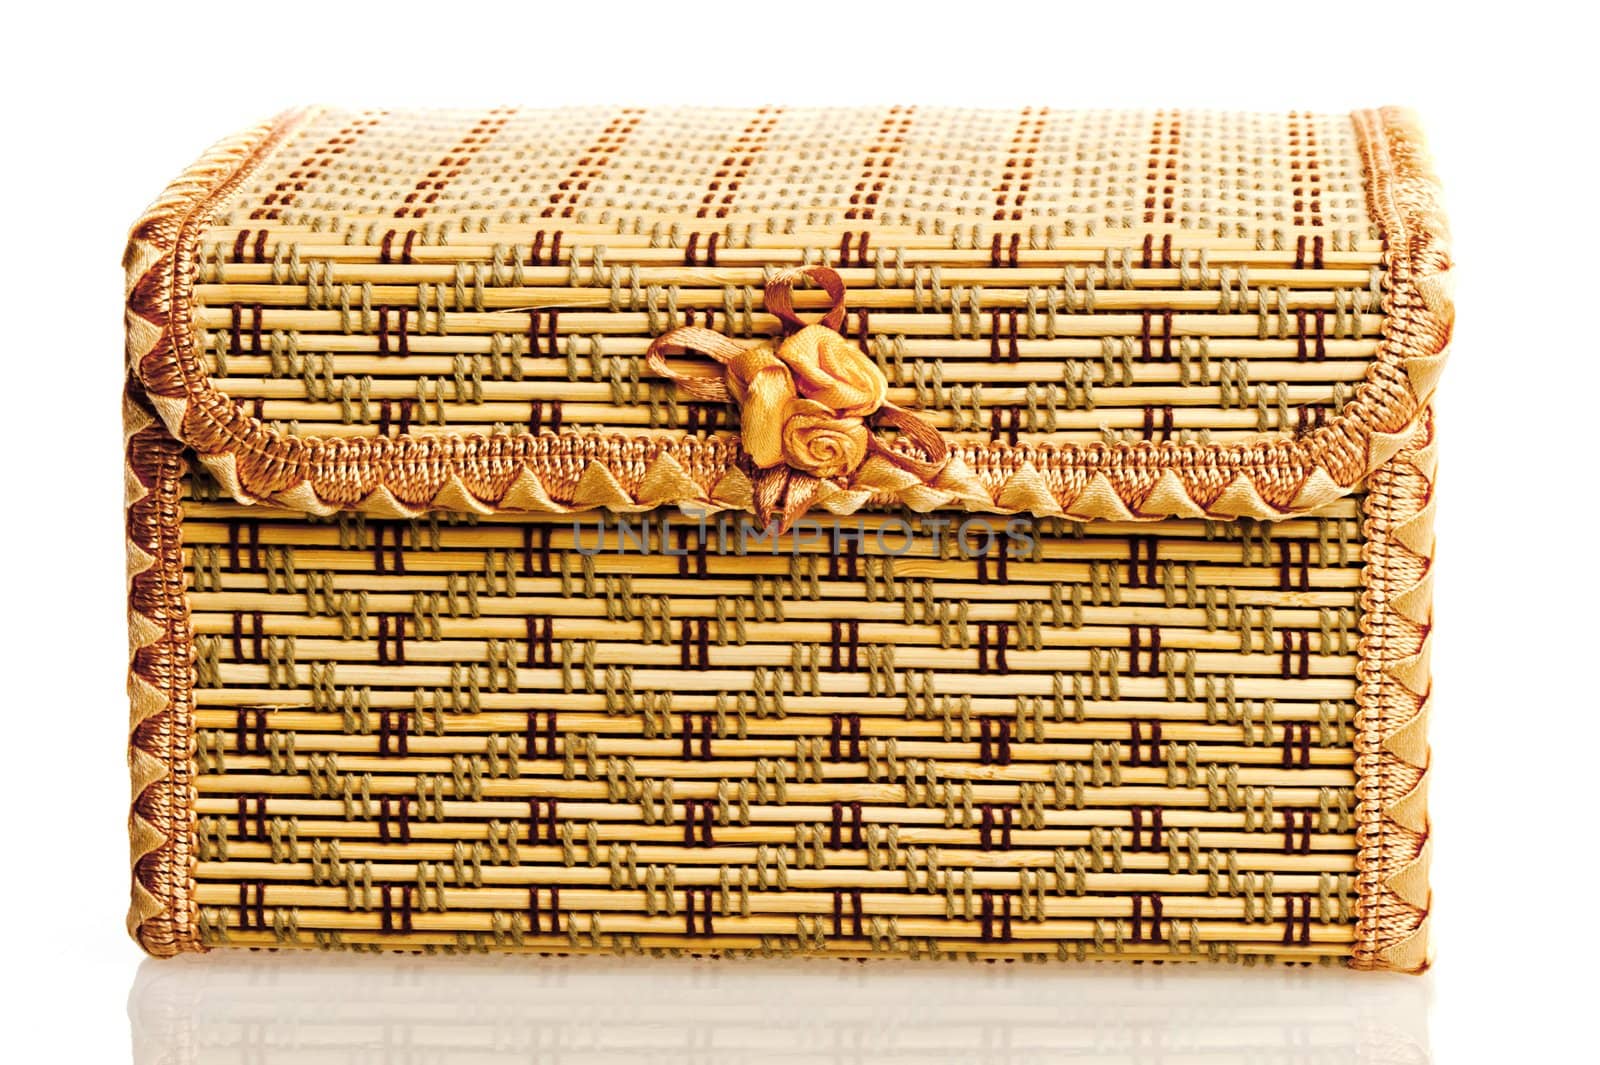 Yellow wicker box for needlework on a white background.